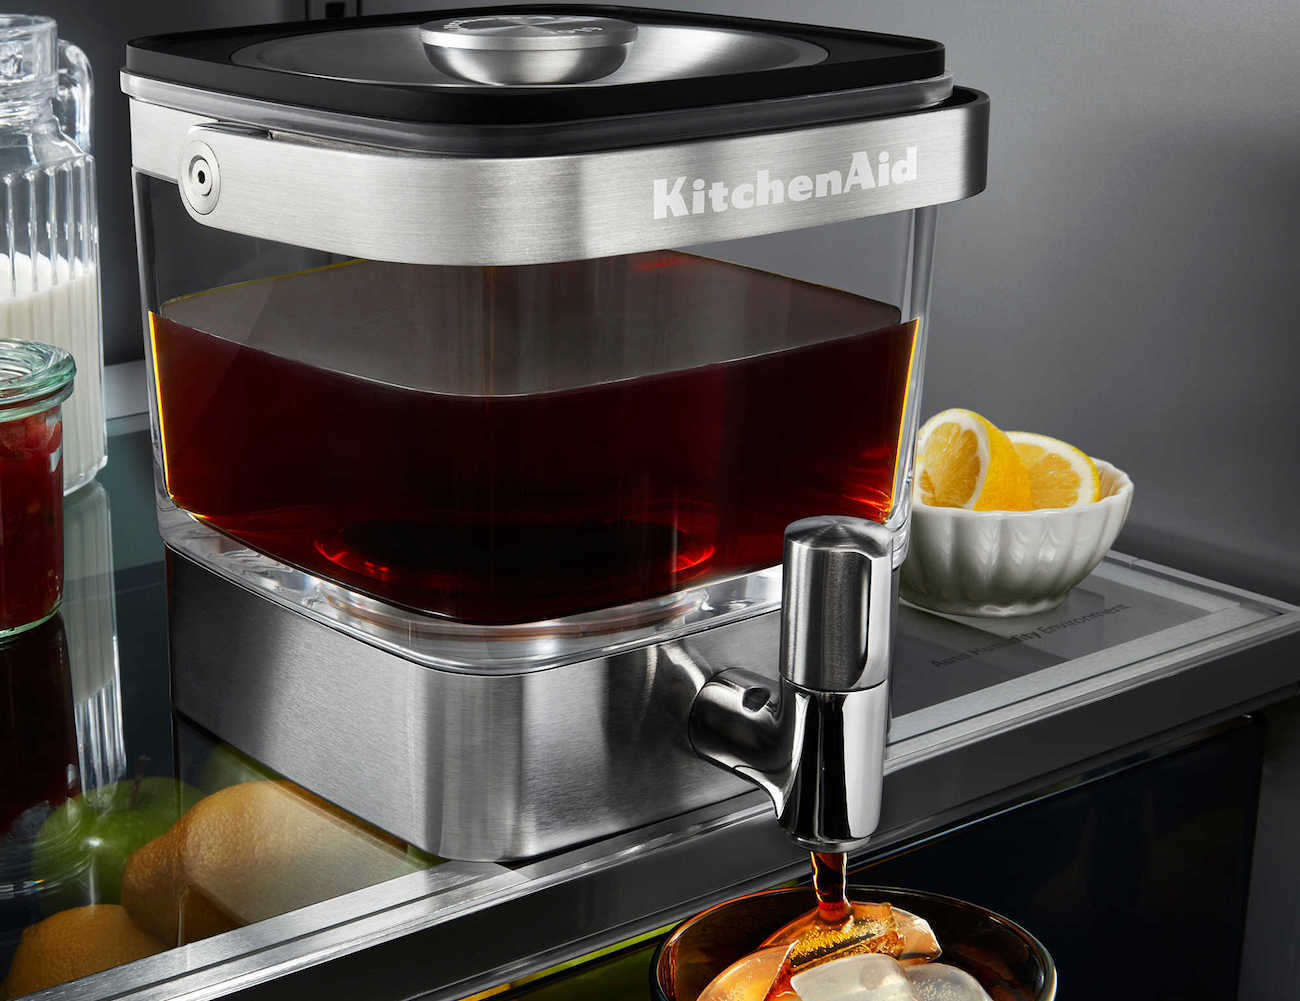 KitchenAid Cold Brew Coffee Maker has a built-in steeper and holds up to 28 ounces